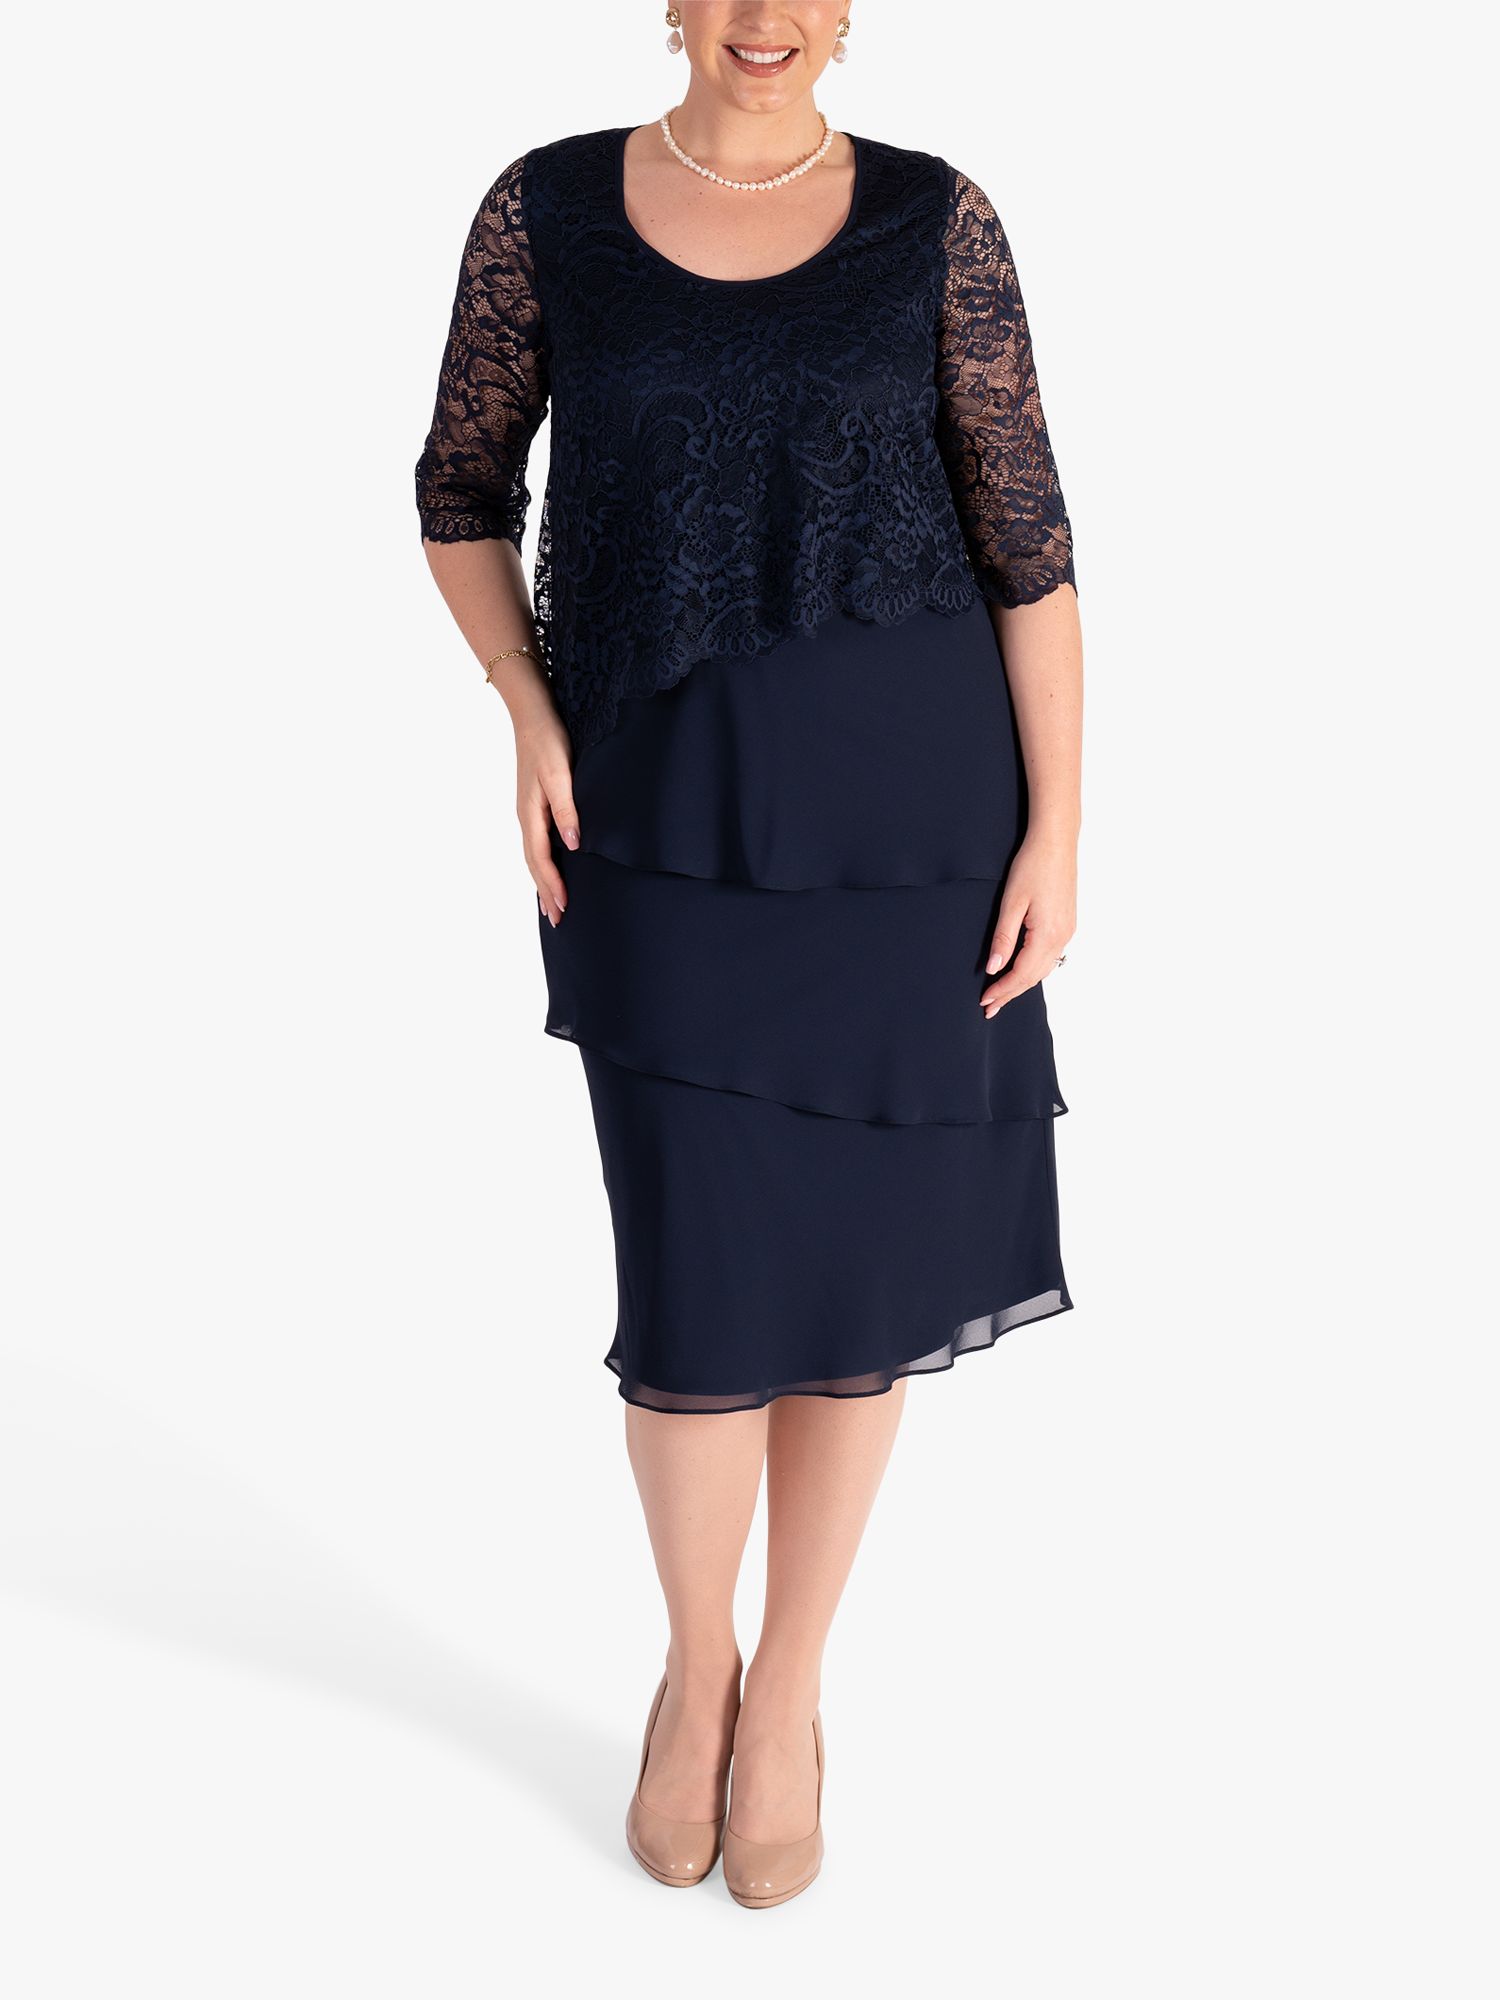 chesca Layered Lace Dress, Navy at John Lewis & Partners